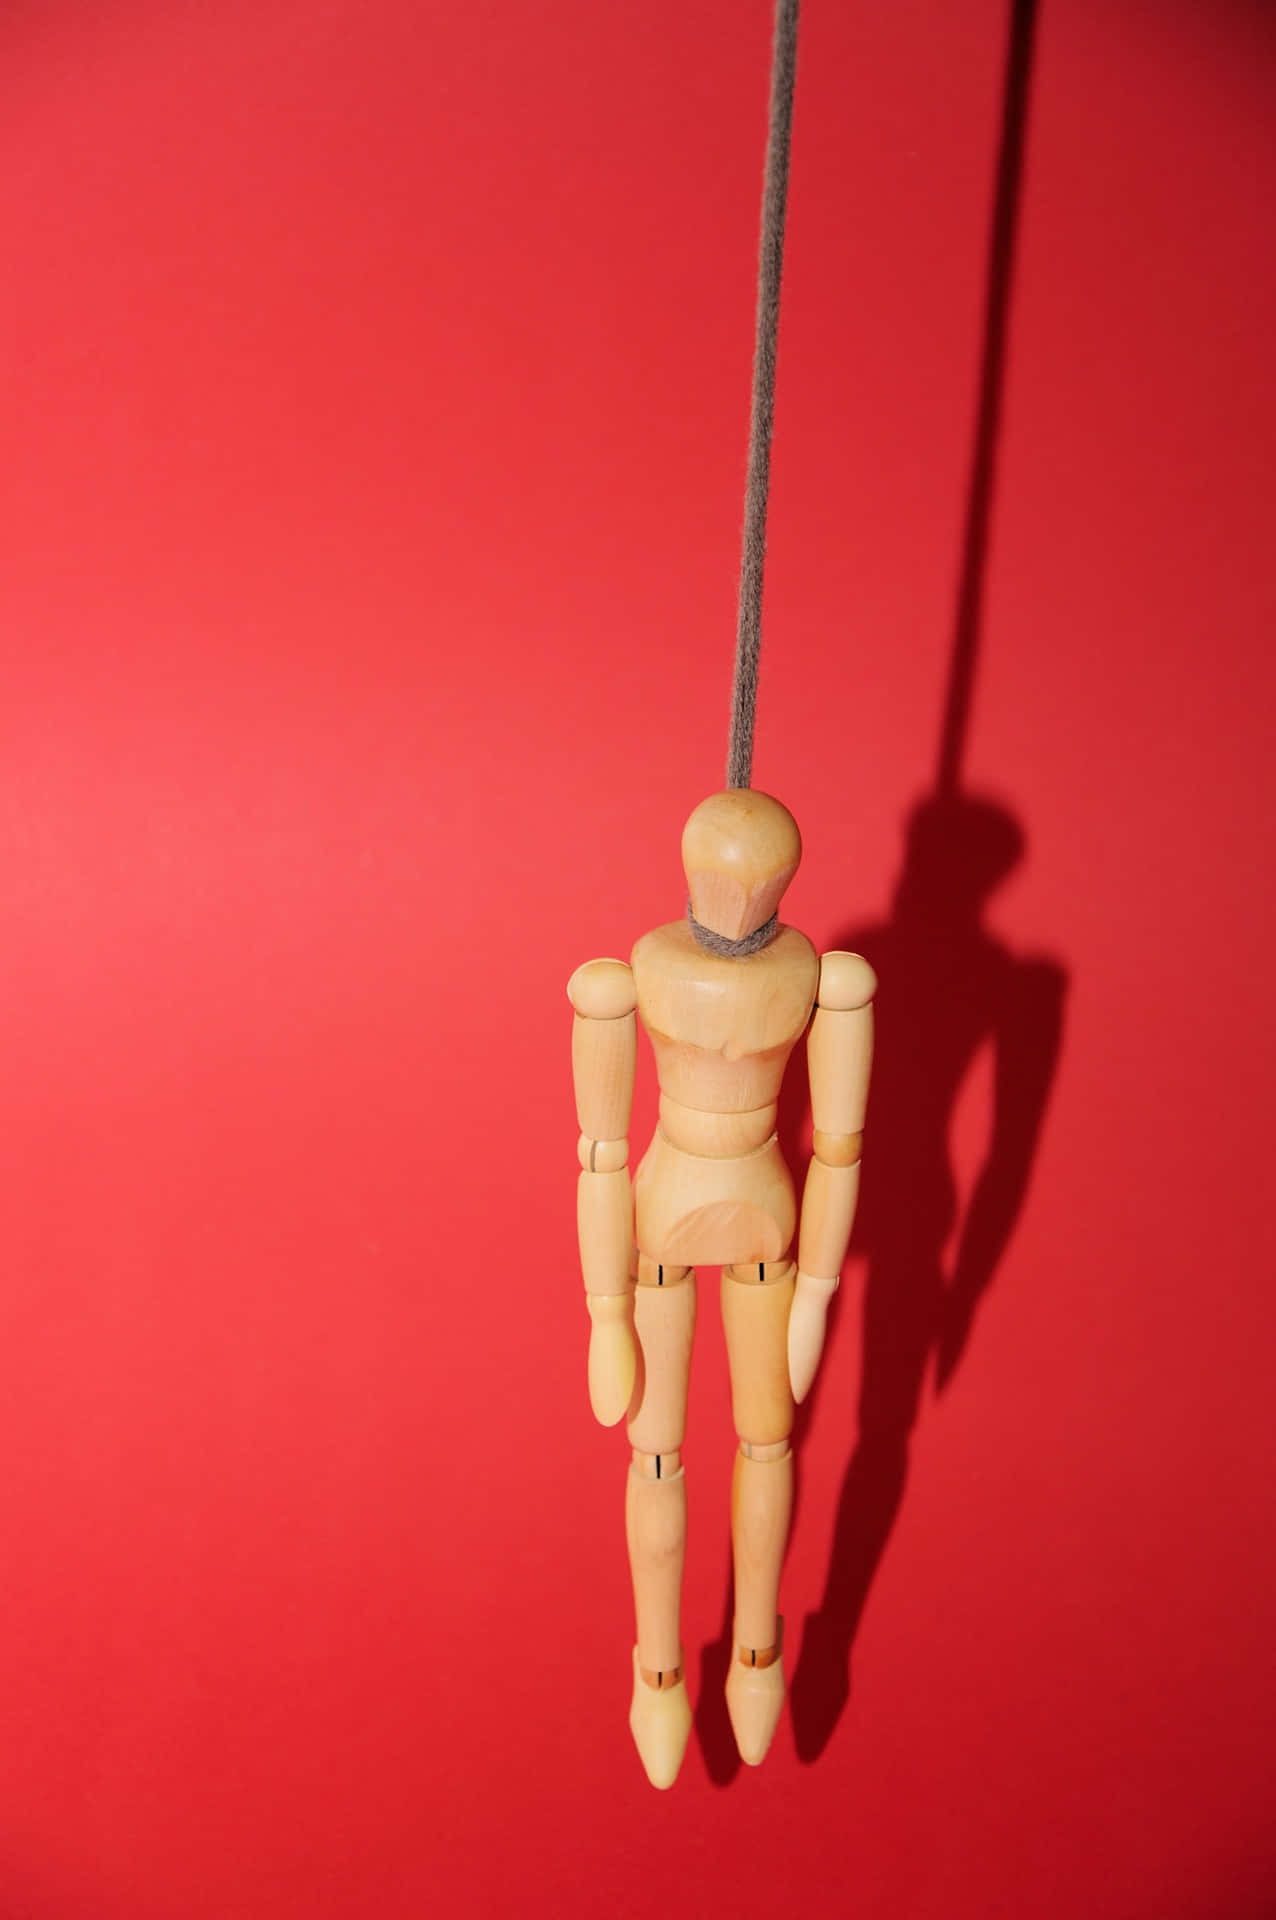 A Wooden Mannequin Hanging From A String Wallpaper